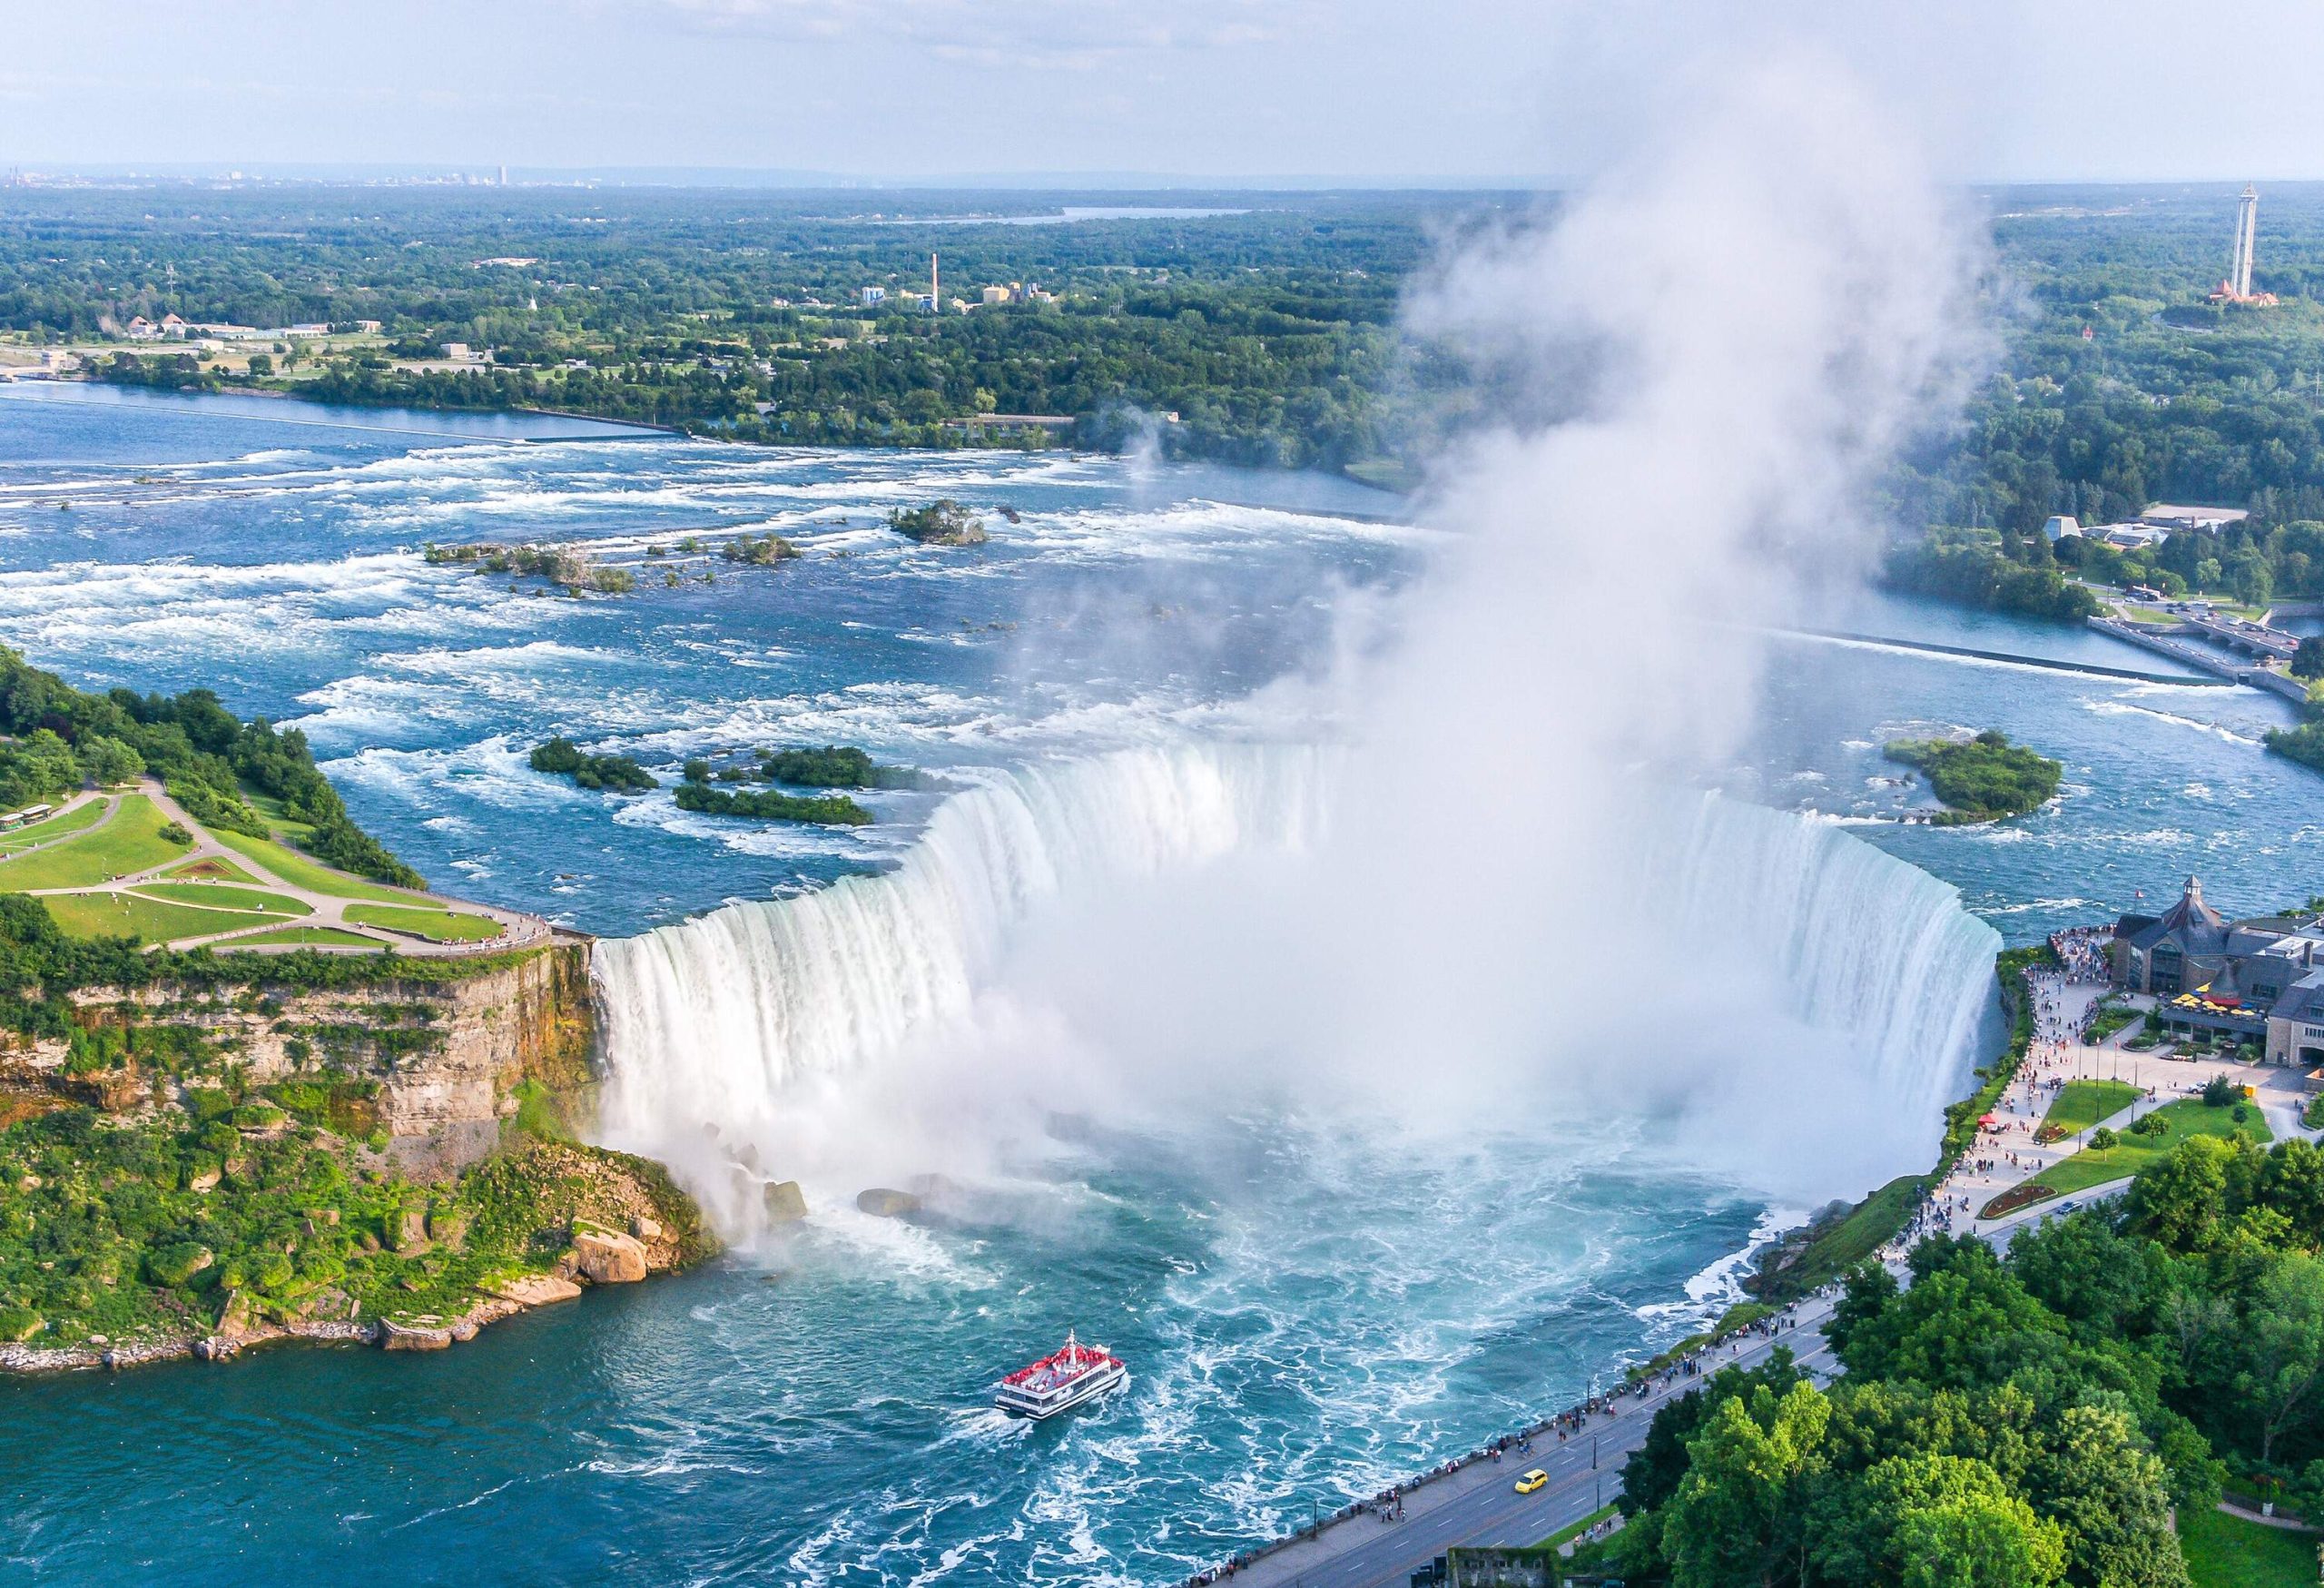 The jaw-dropping spectacular Horseshoe Falls cascade into the cliffs with a red tourist boat traversing the gushing river.